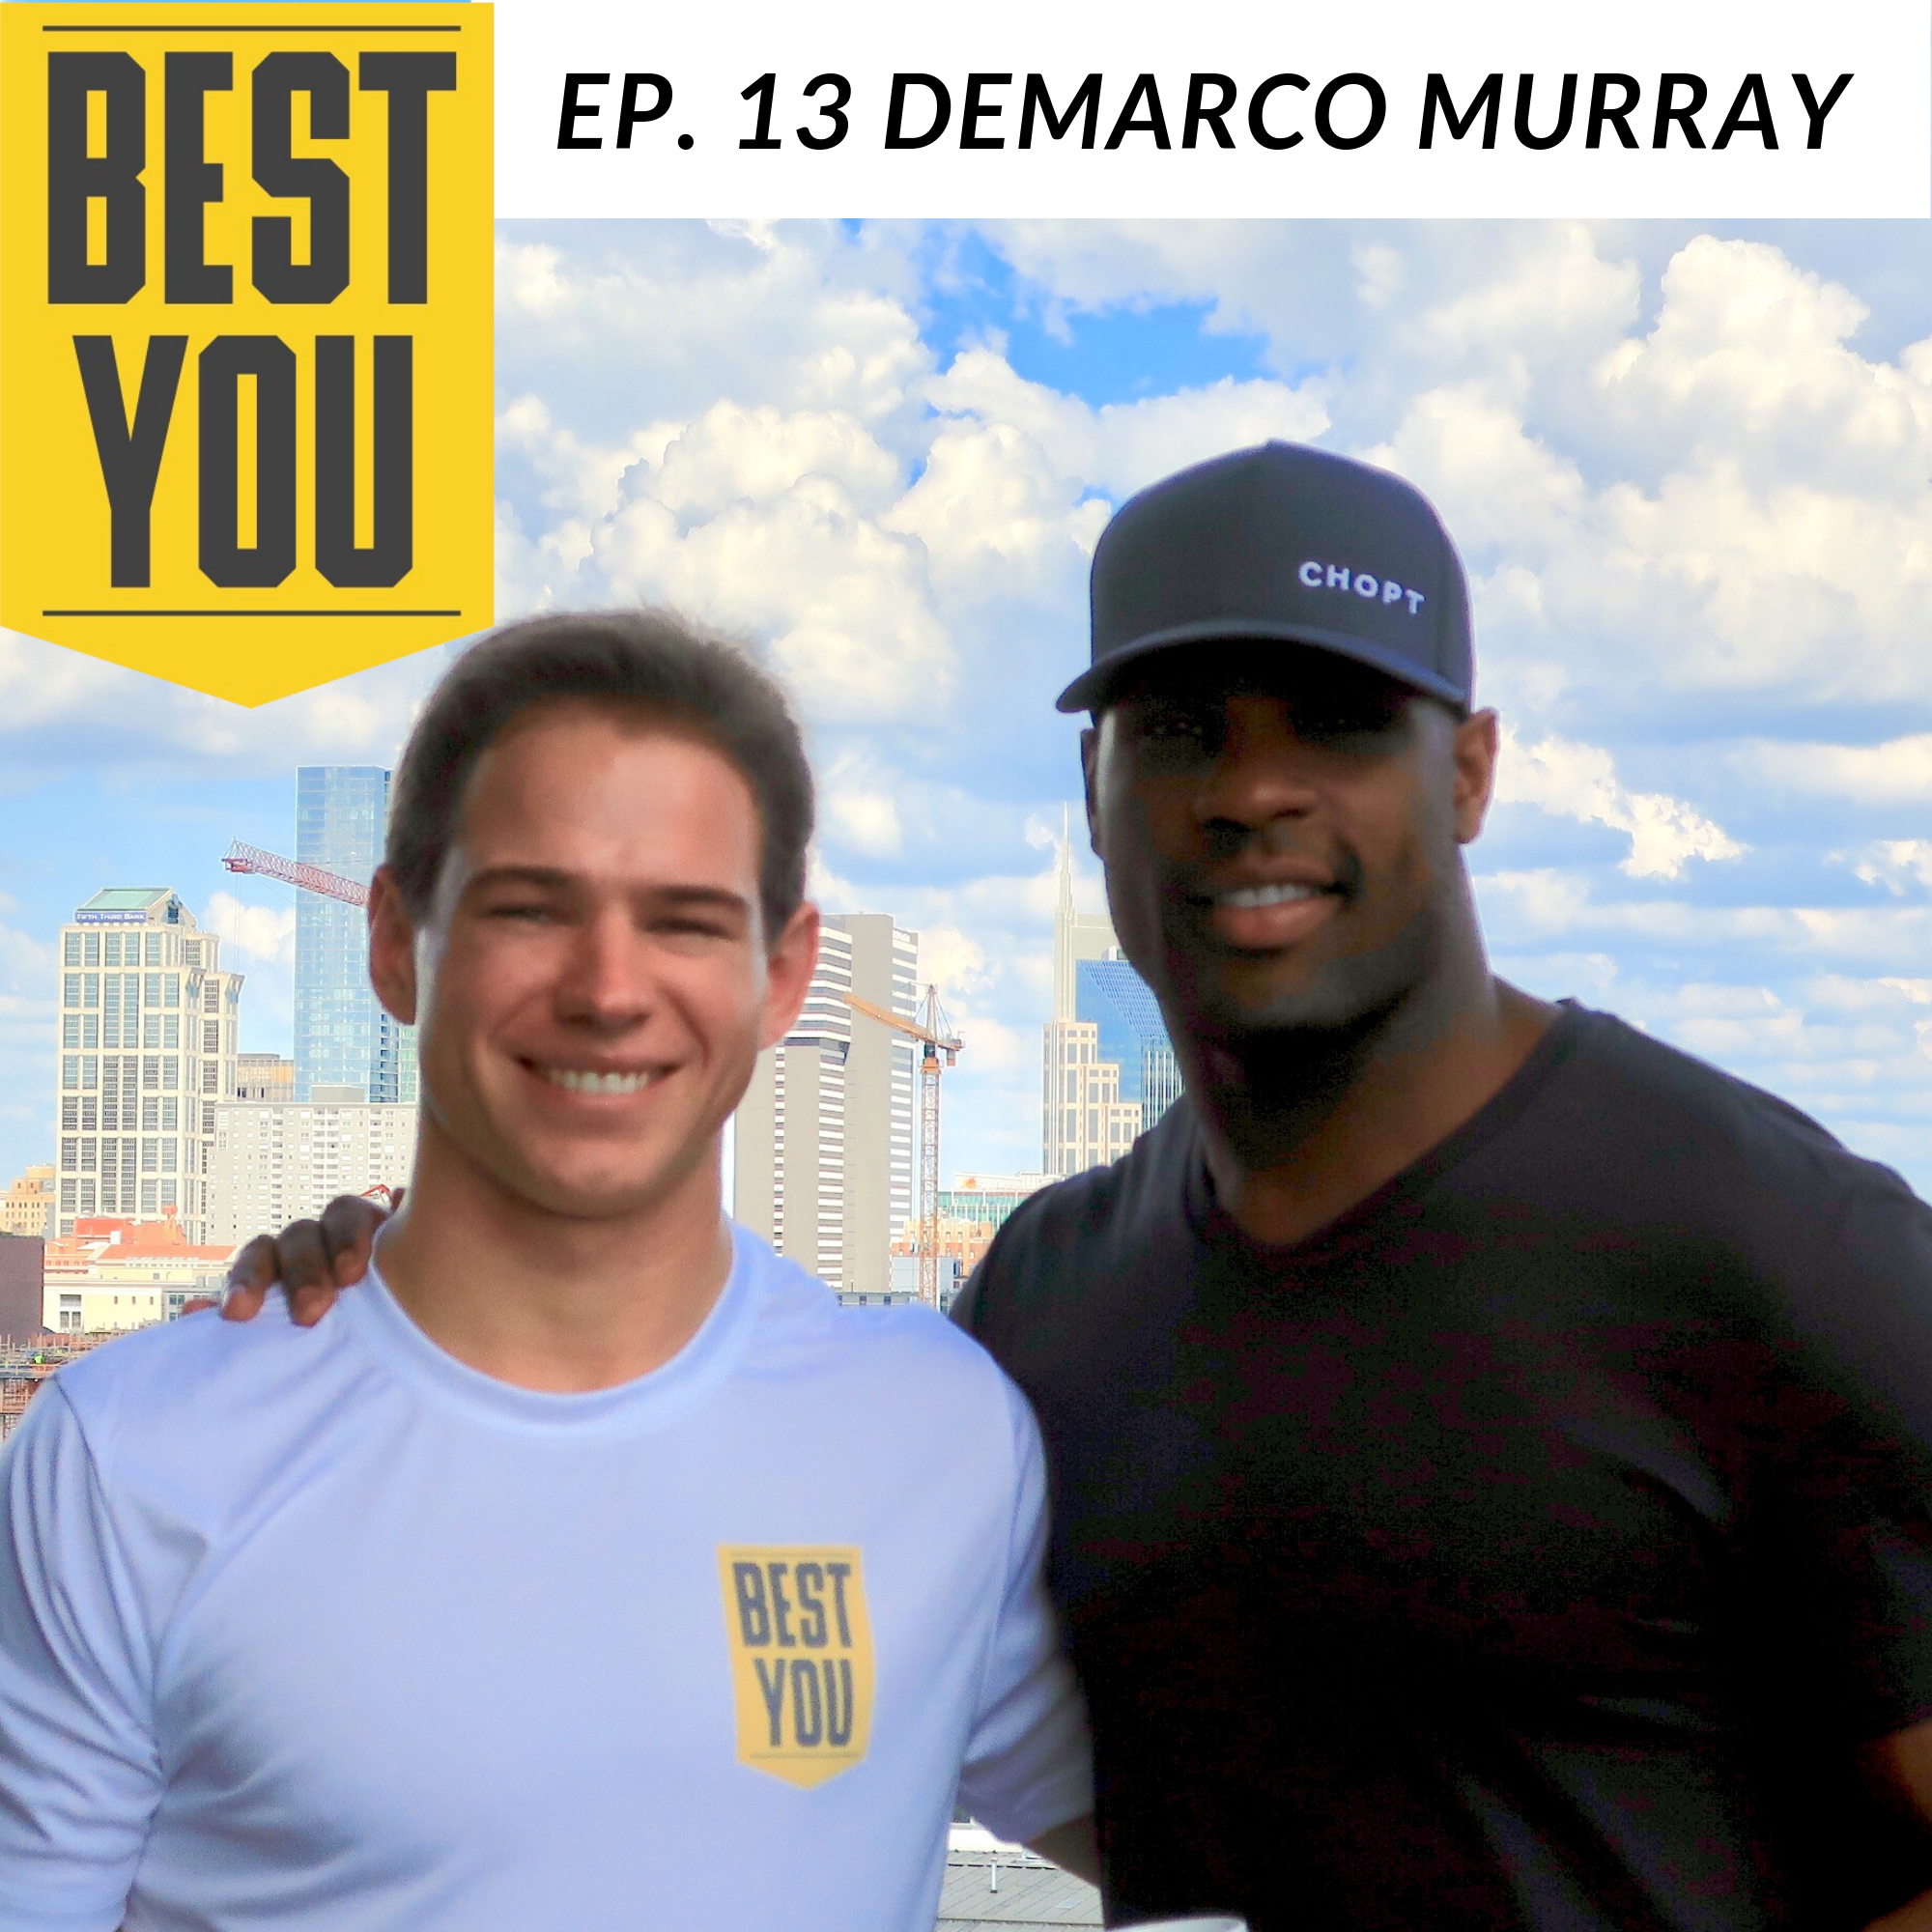 Ep. 25 DeMarco Murray - Hard Work and Respect